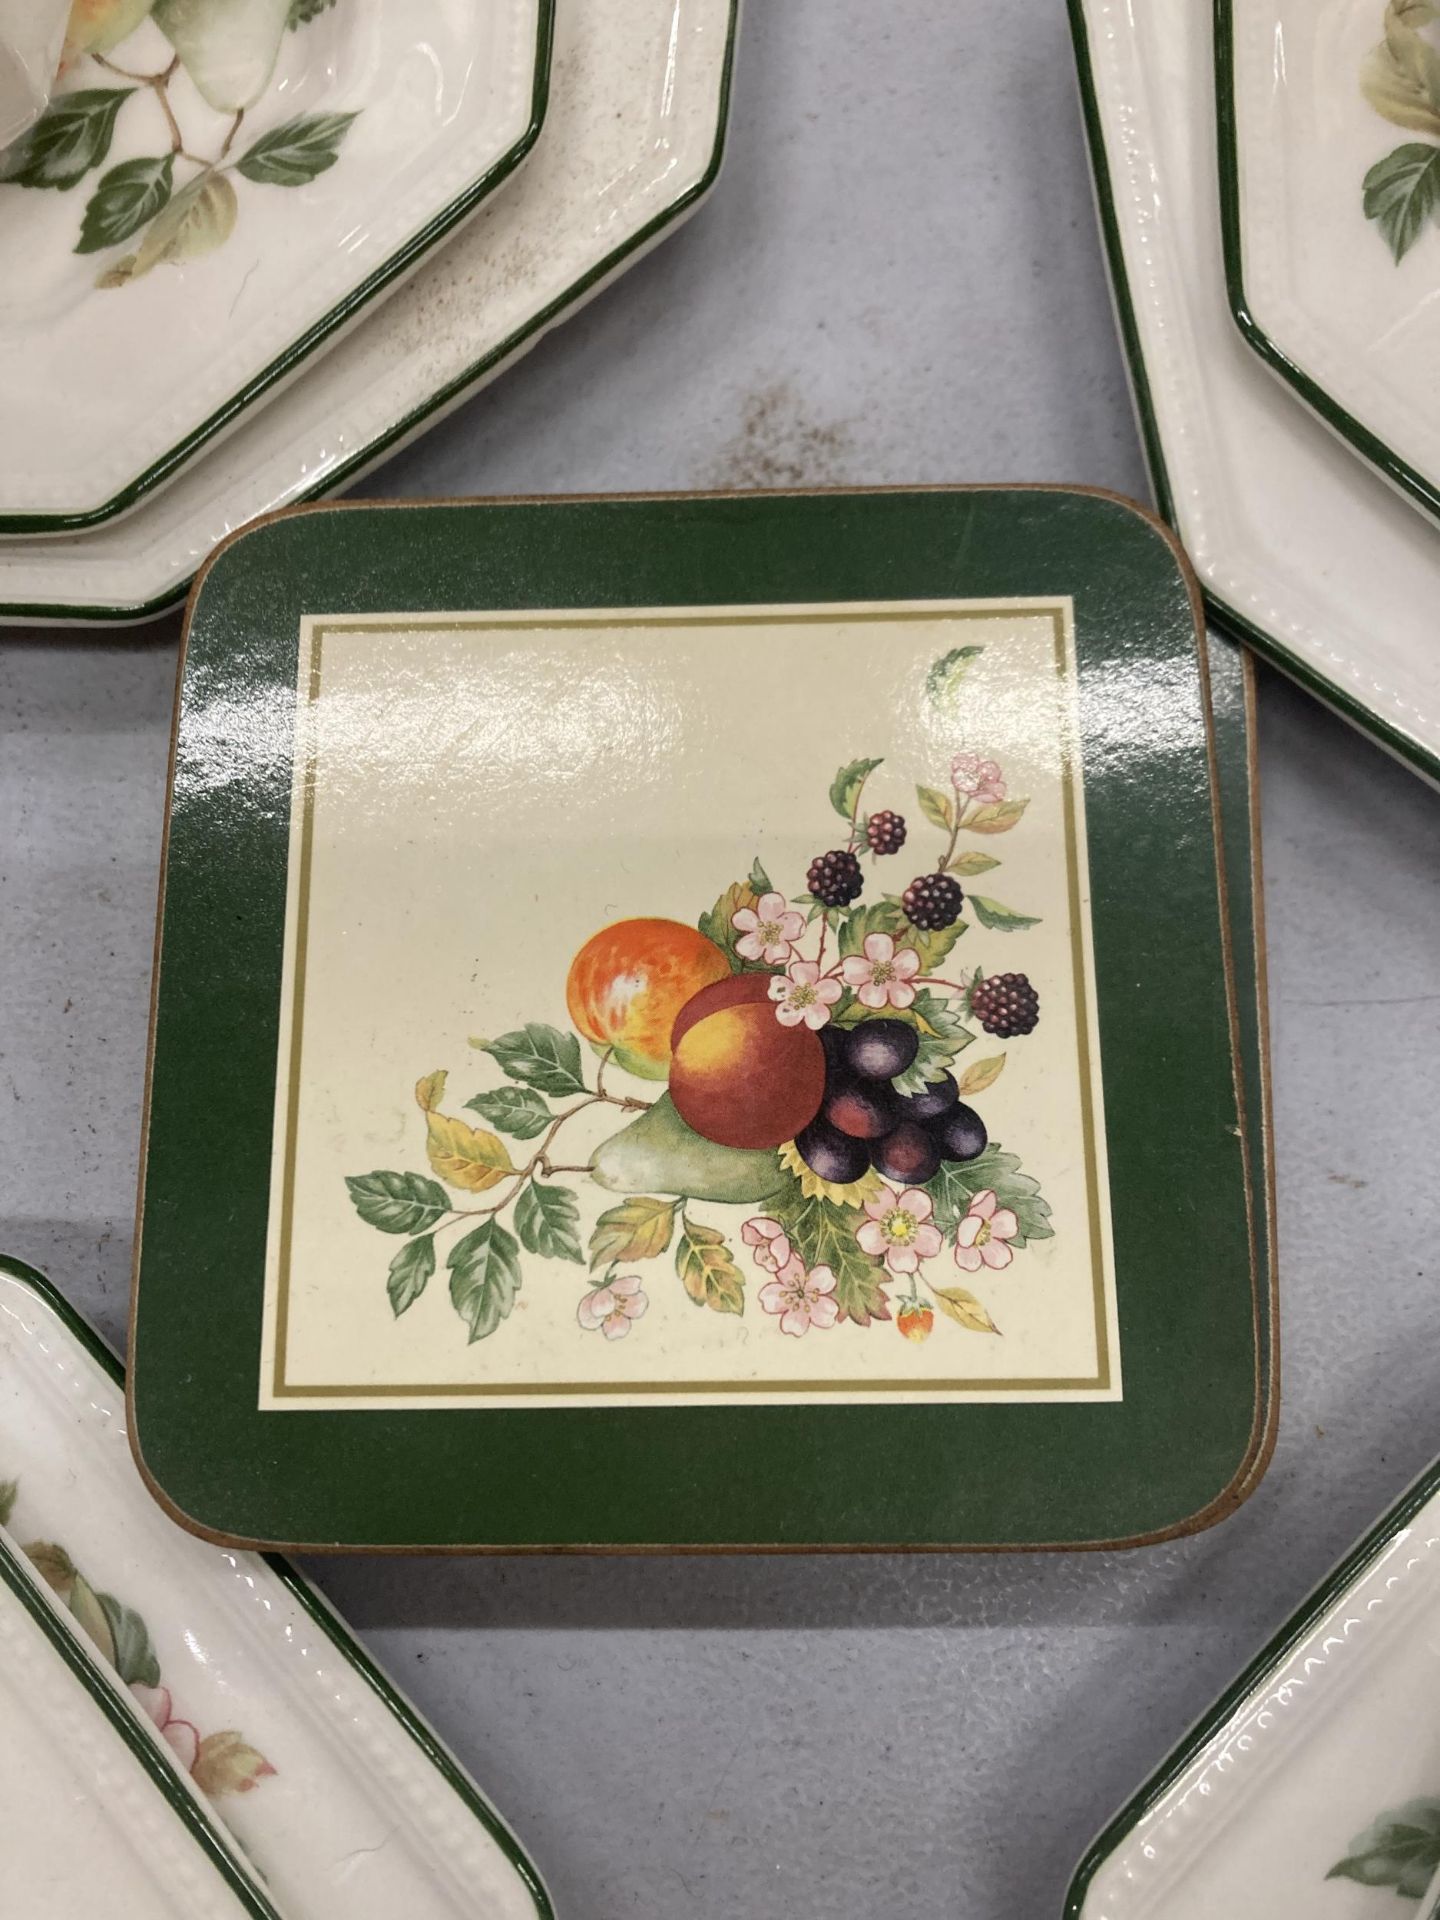 A JOHNSONS BROTHERS FRESH FRUIT 20 PIECE PART DINNER SET WITH CORK COASTERS - Image 3 of 4